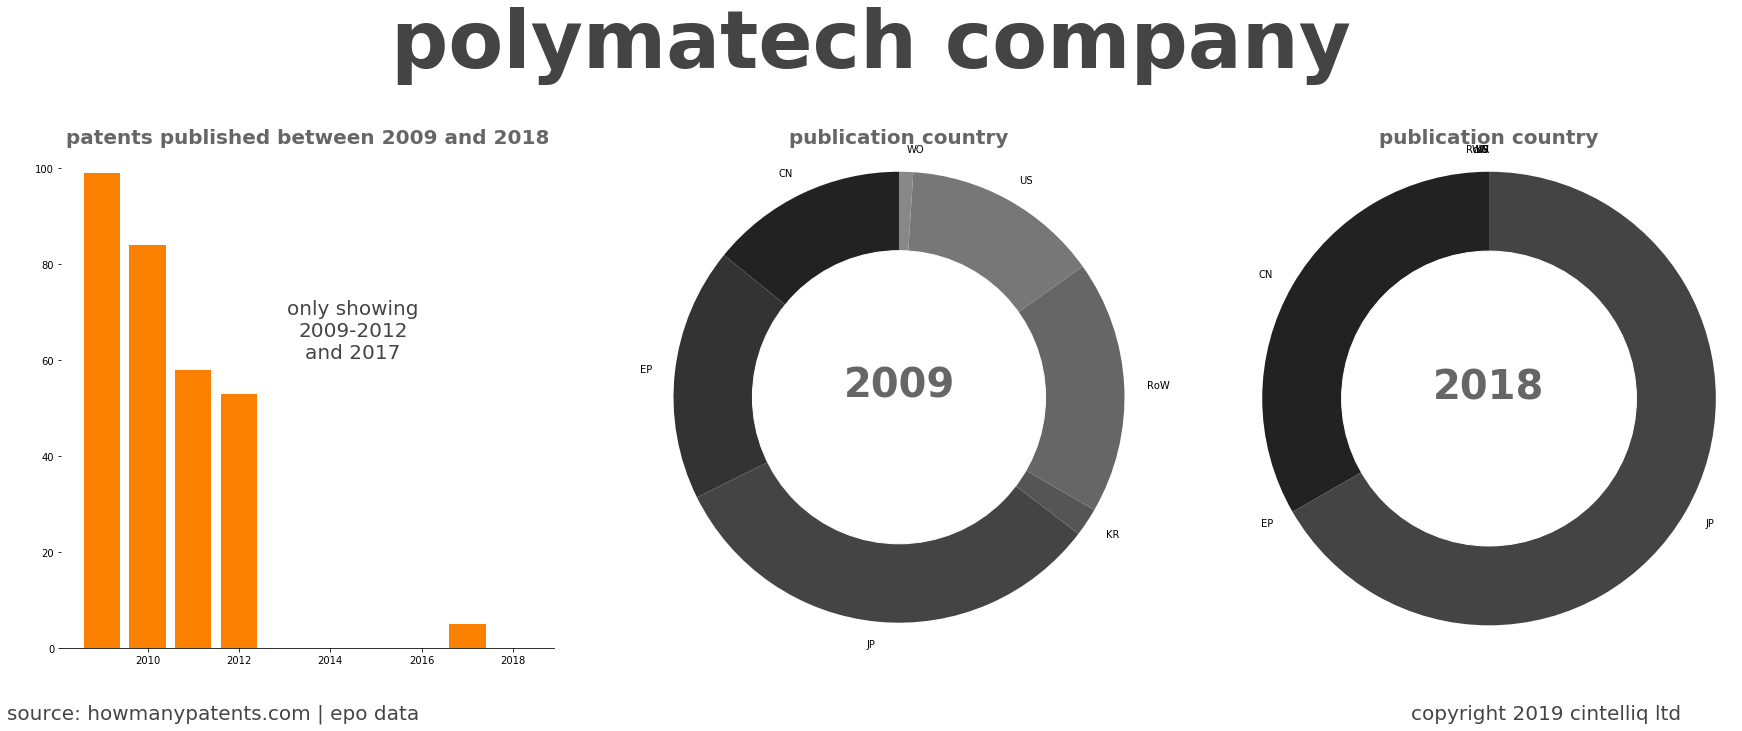 summary of patents for Polymatech Company